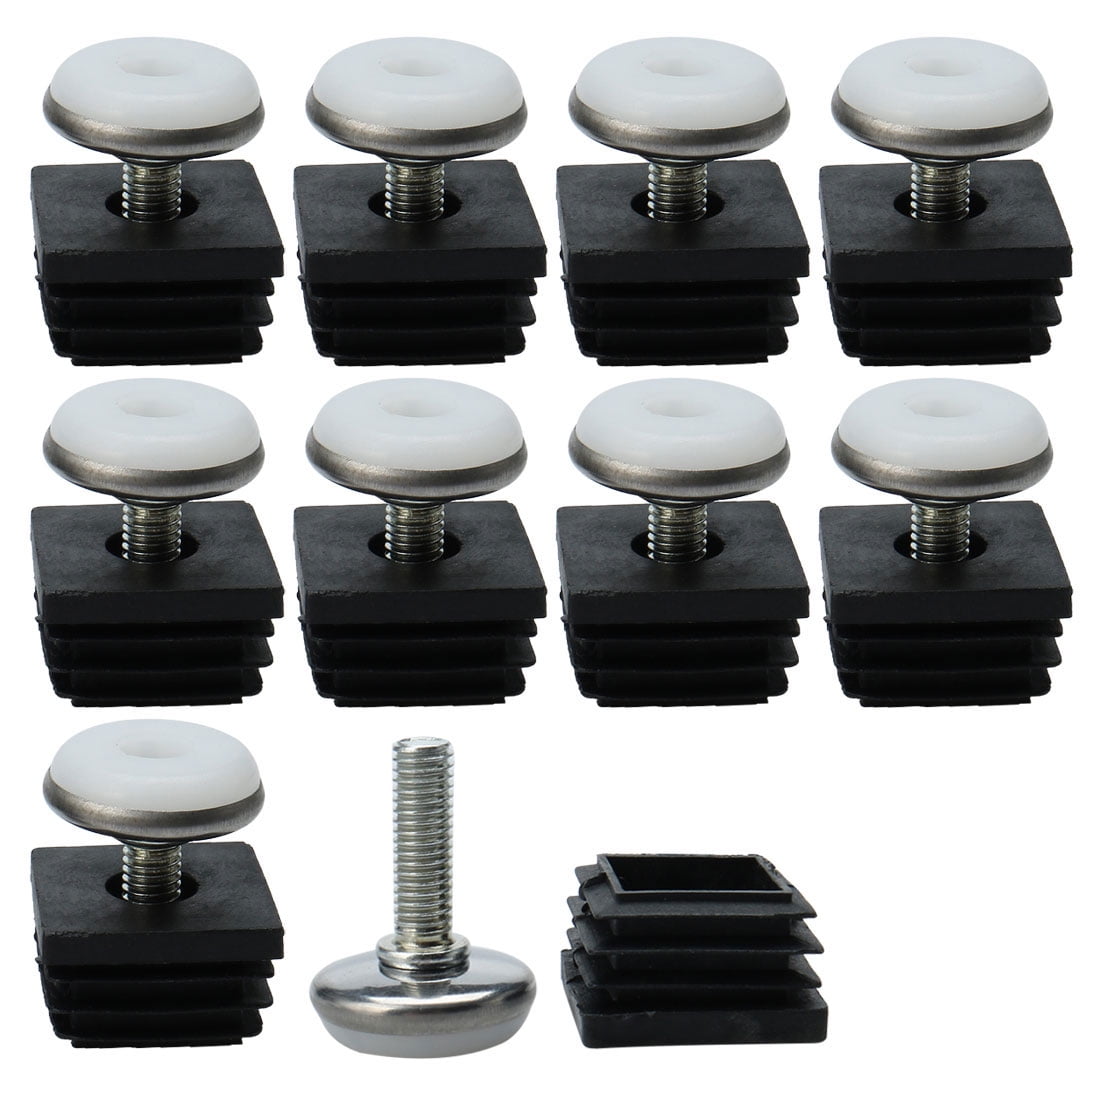 M6 BLACK Levelling Feet Glides Adjustable 20mm NUTS for Small Tables WOBBLY 